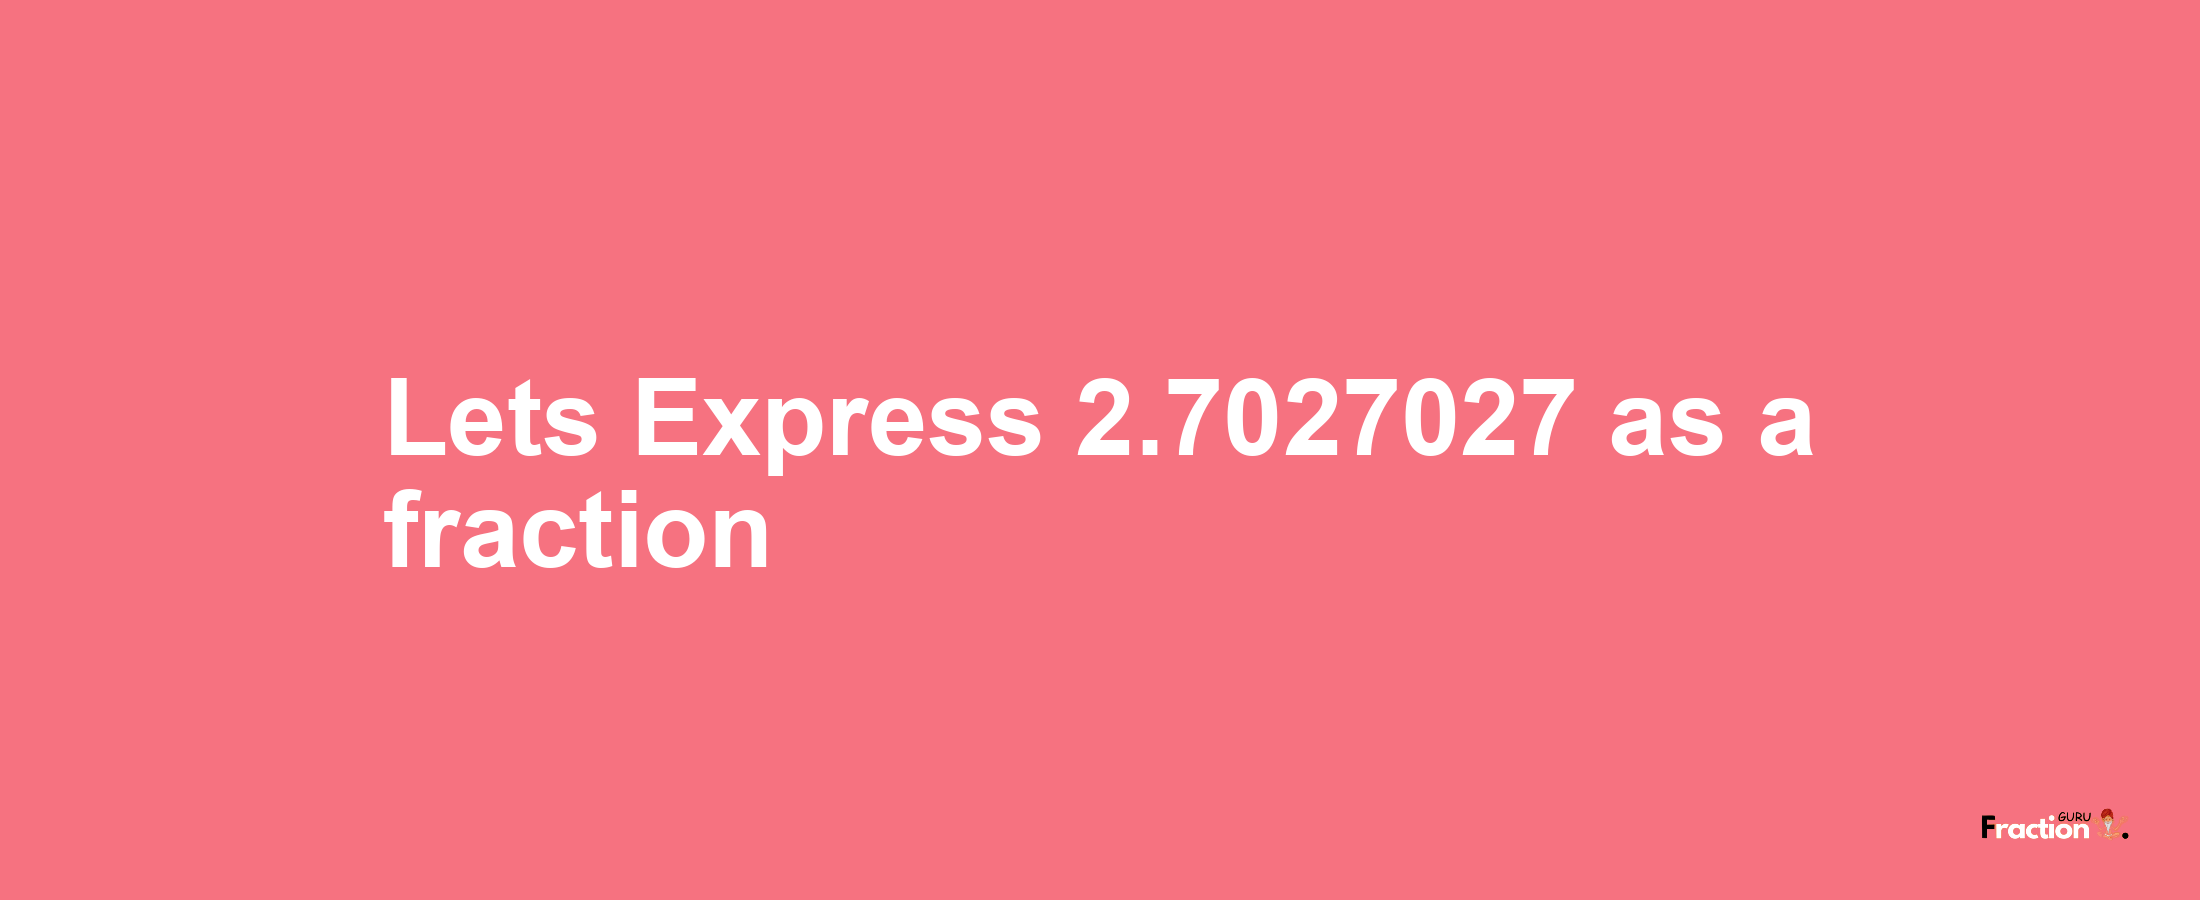 Lets Express 2.7027027 as afraction